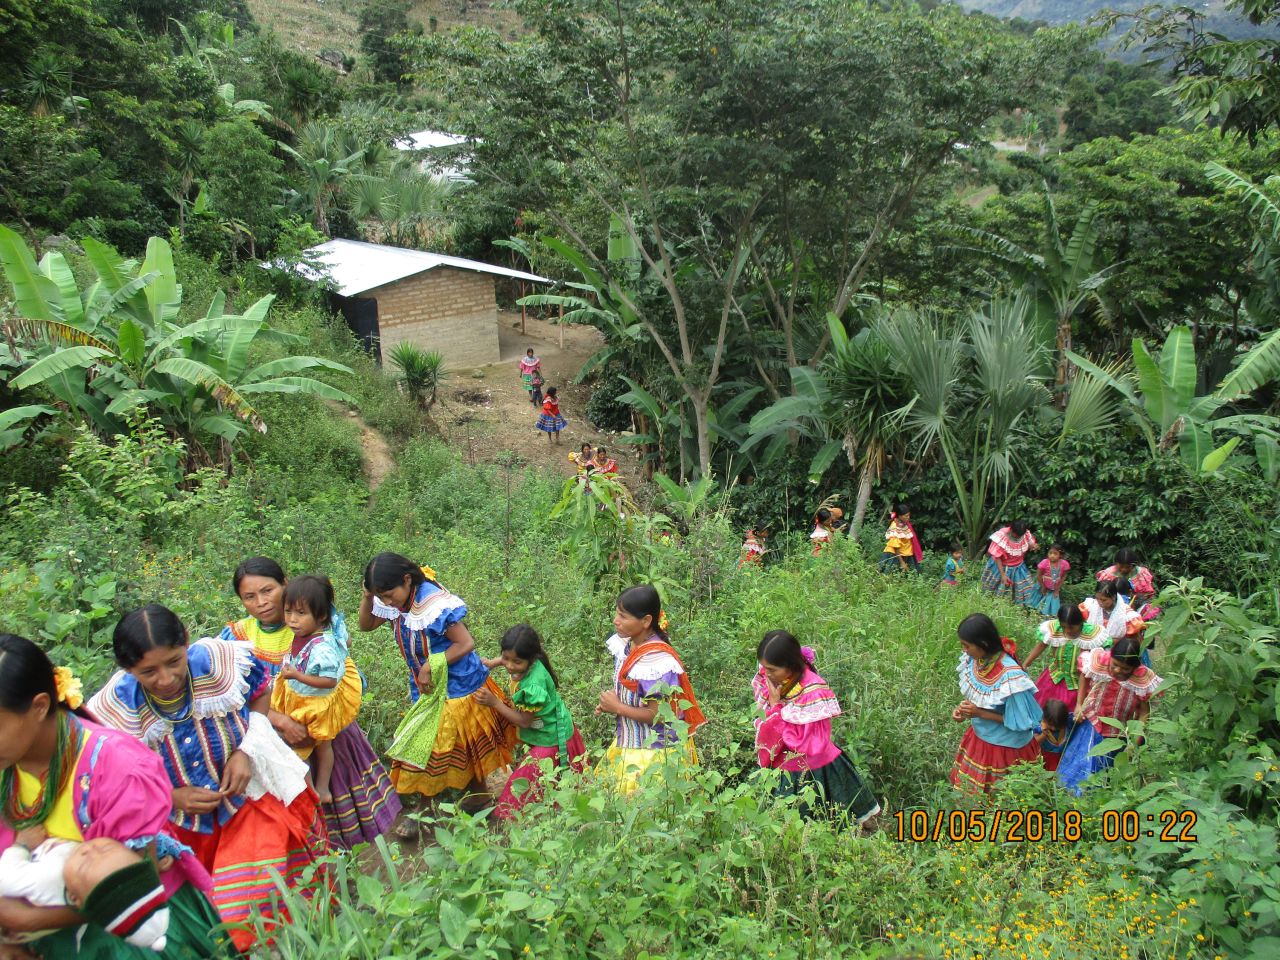 The Maya Ch'orti' people are spread across six villages in Chiquimula, the Mesoamerican dry corridor of Guatemala. Their diet is based on a mix of agriculture, agroforestry and home gardens. However, according to the FAO, climatic uncertainty and political conflict in the region has heavily reduced land access, degraded natural resources and damaged the self-sufficiency of the Maya Ch'orti'. Insects, which were once a regular source of protein for the community, are now rarely eaten, and wild foraging has reduced, leading to a less diverse diet. 